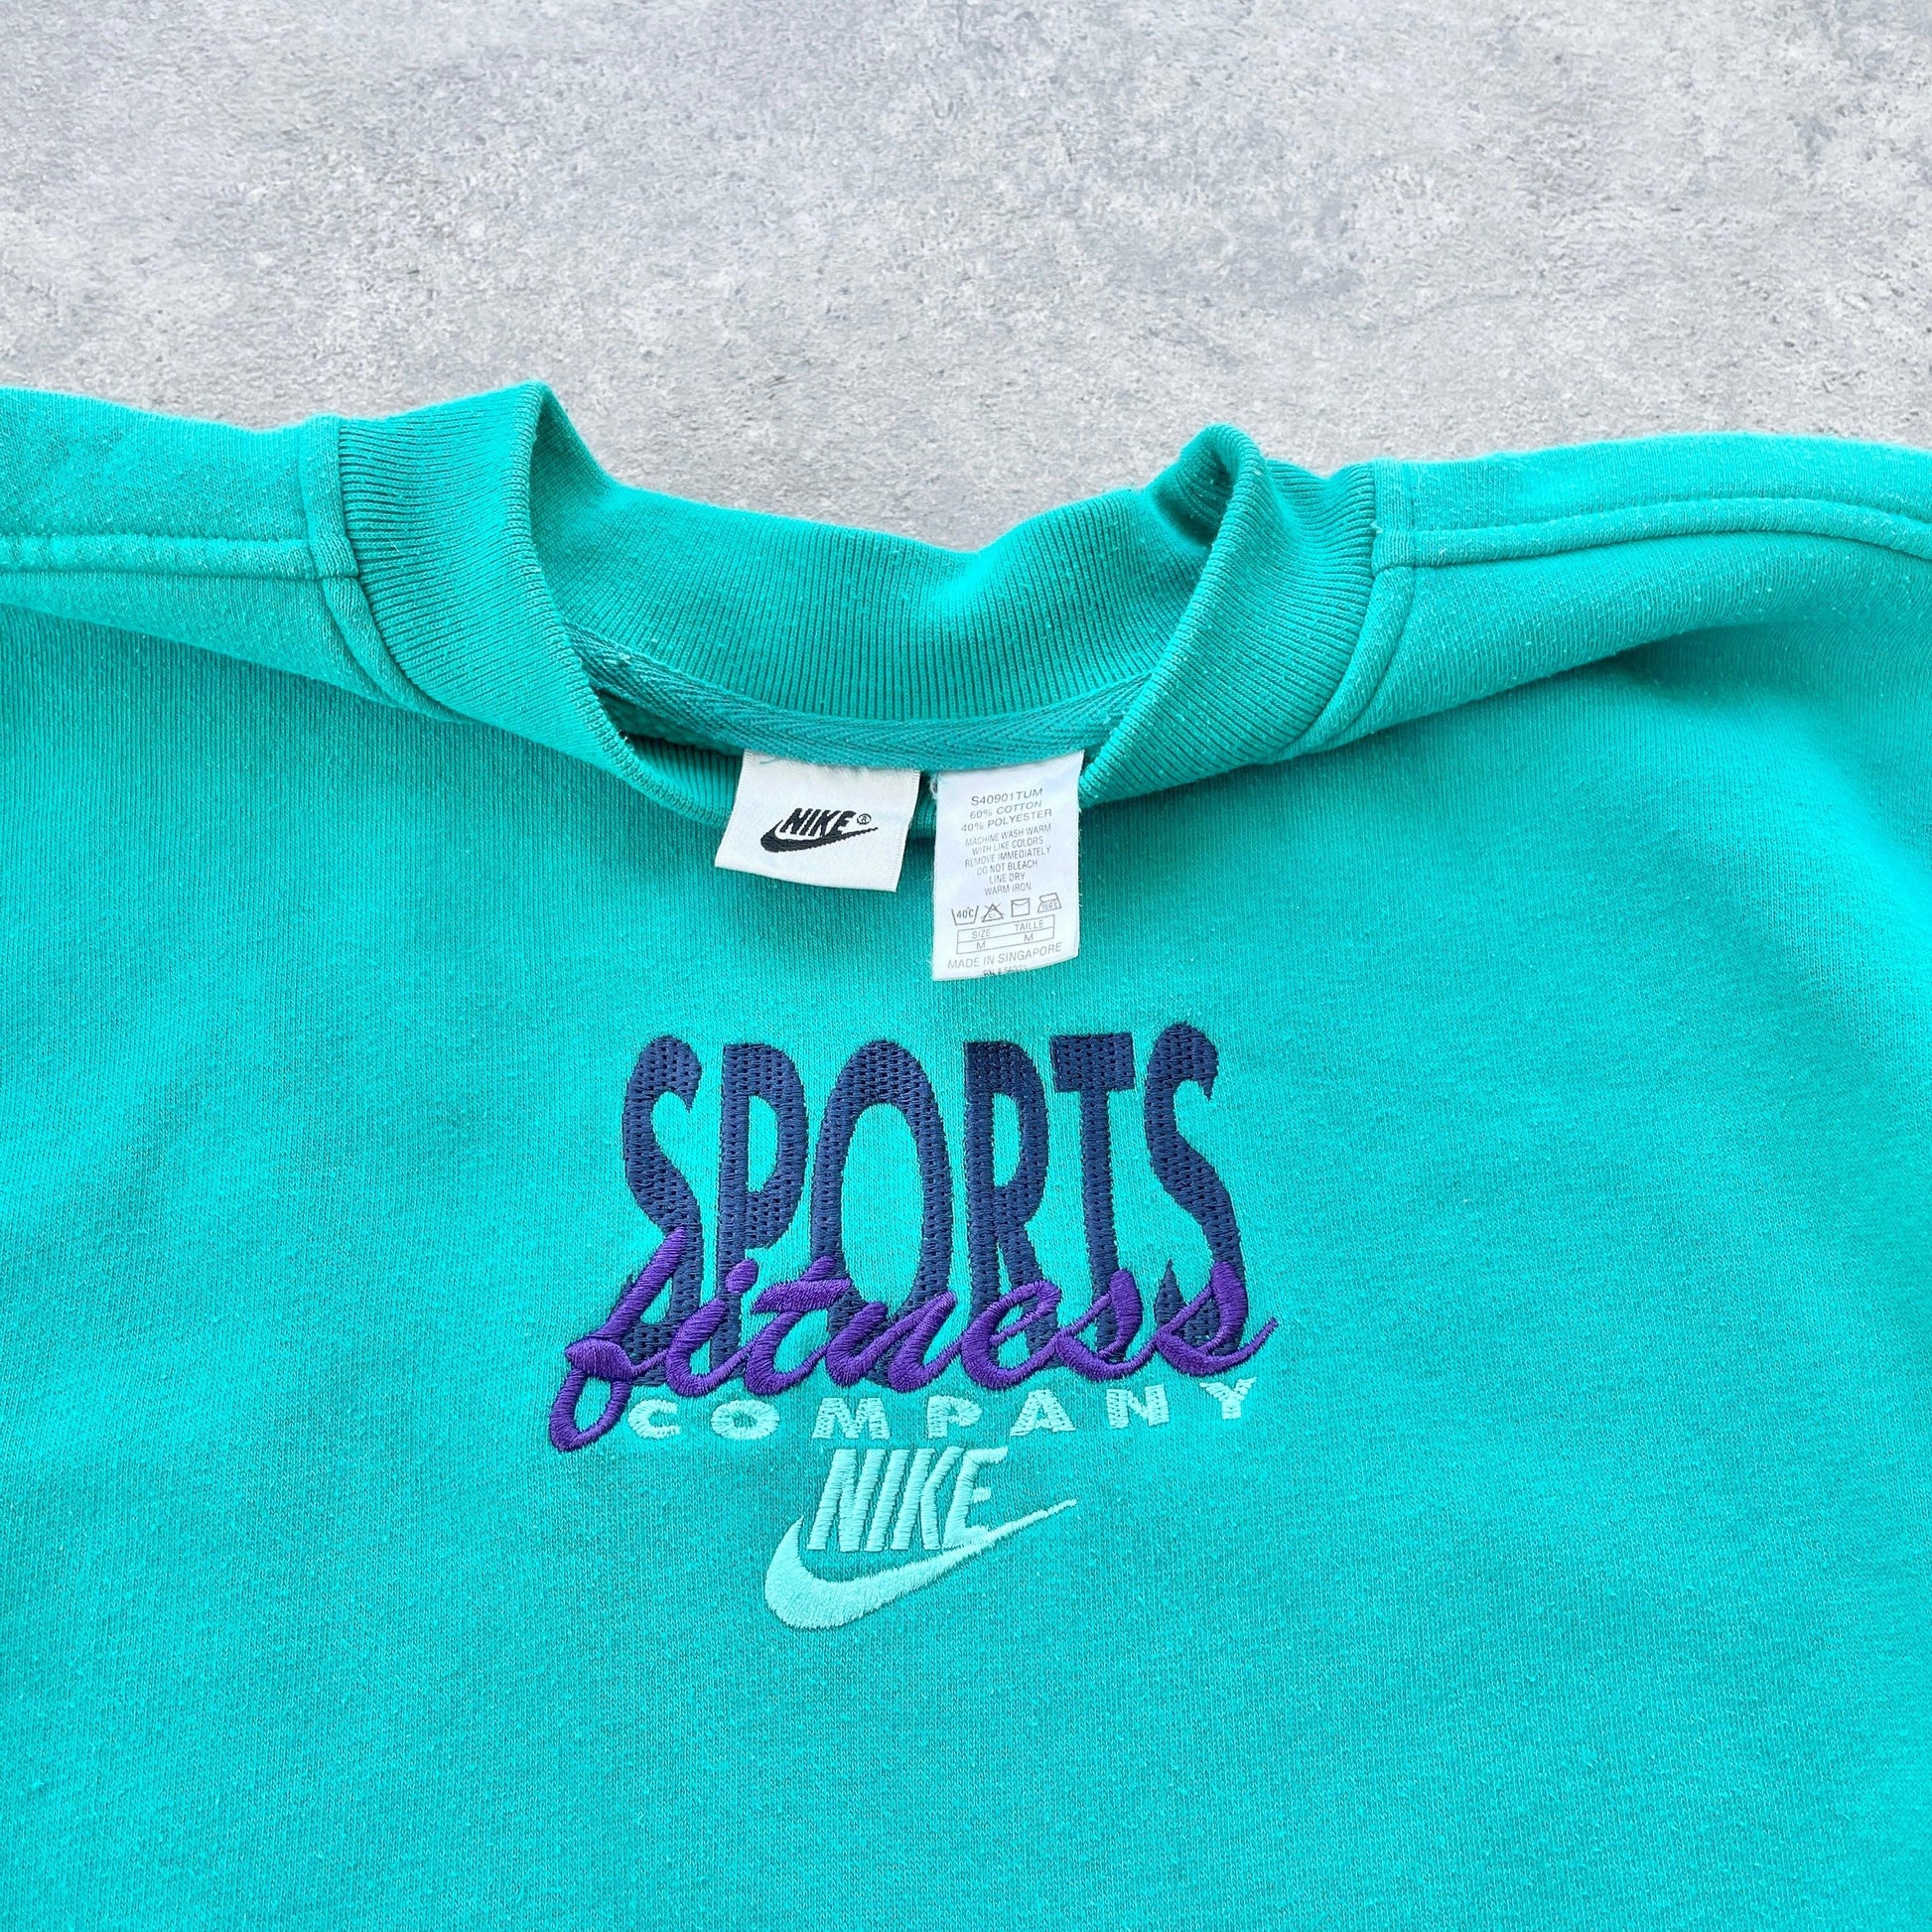 Nike RARE 1990s ‘sports fitness company’ heavyweight embroidered sweatshirt (M) - Known Source